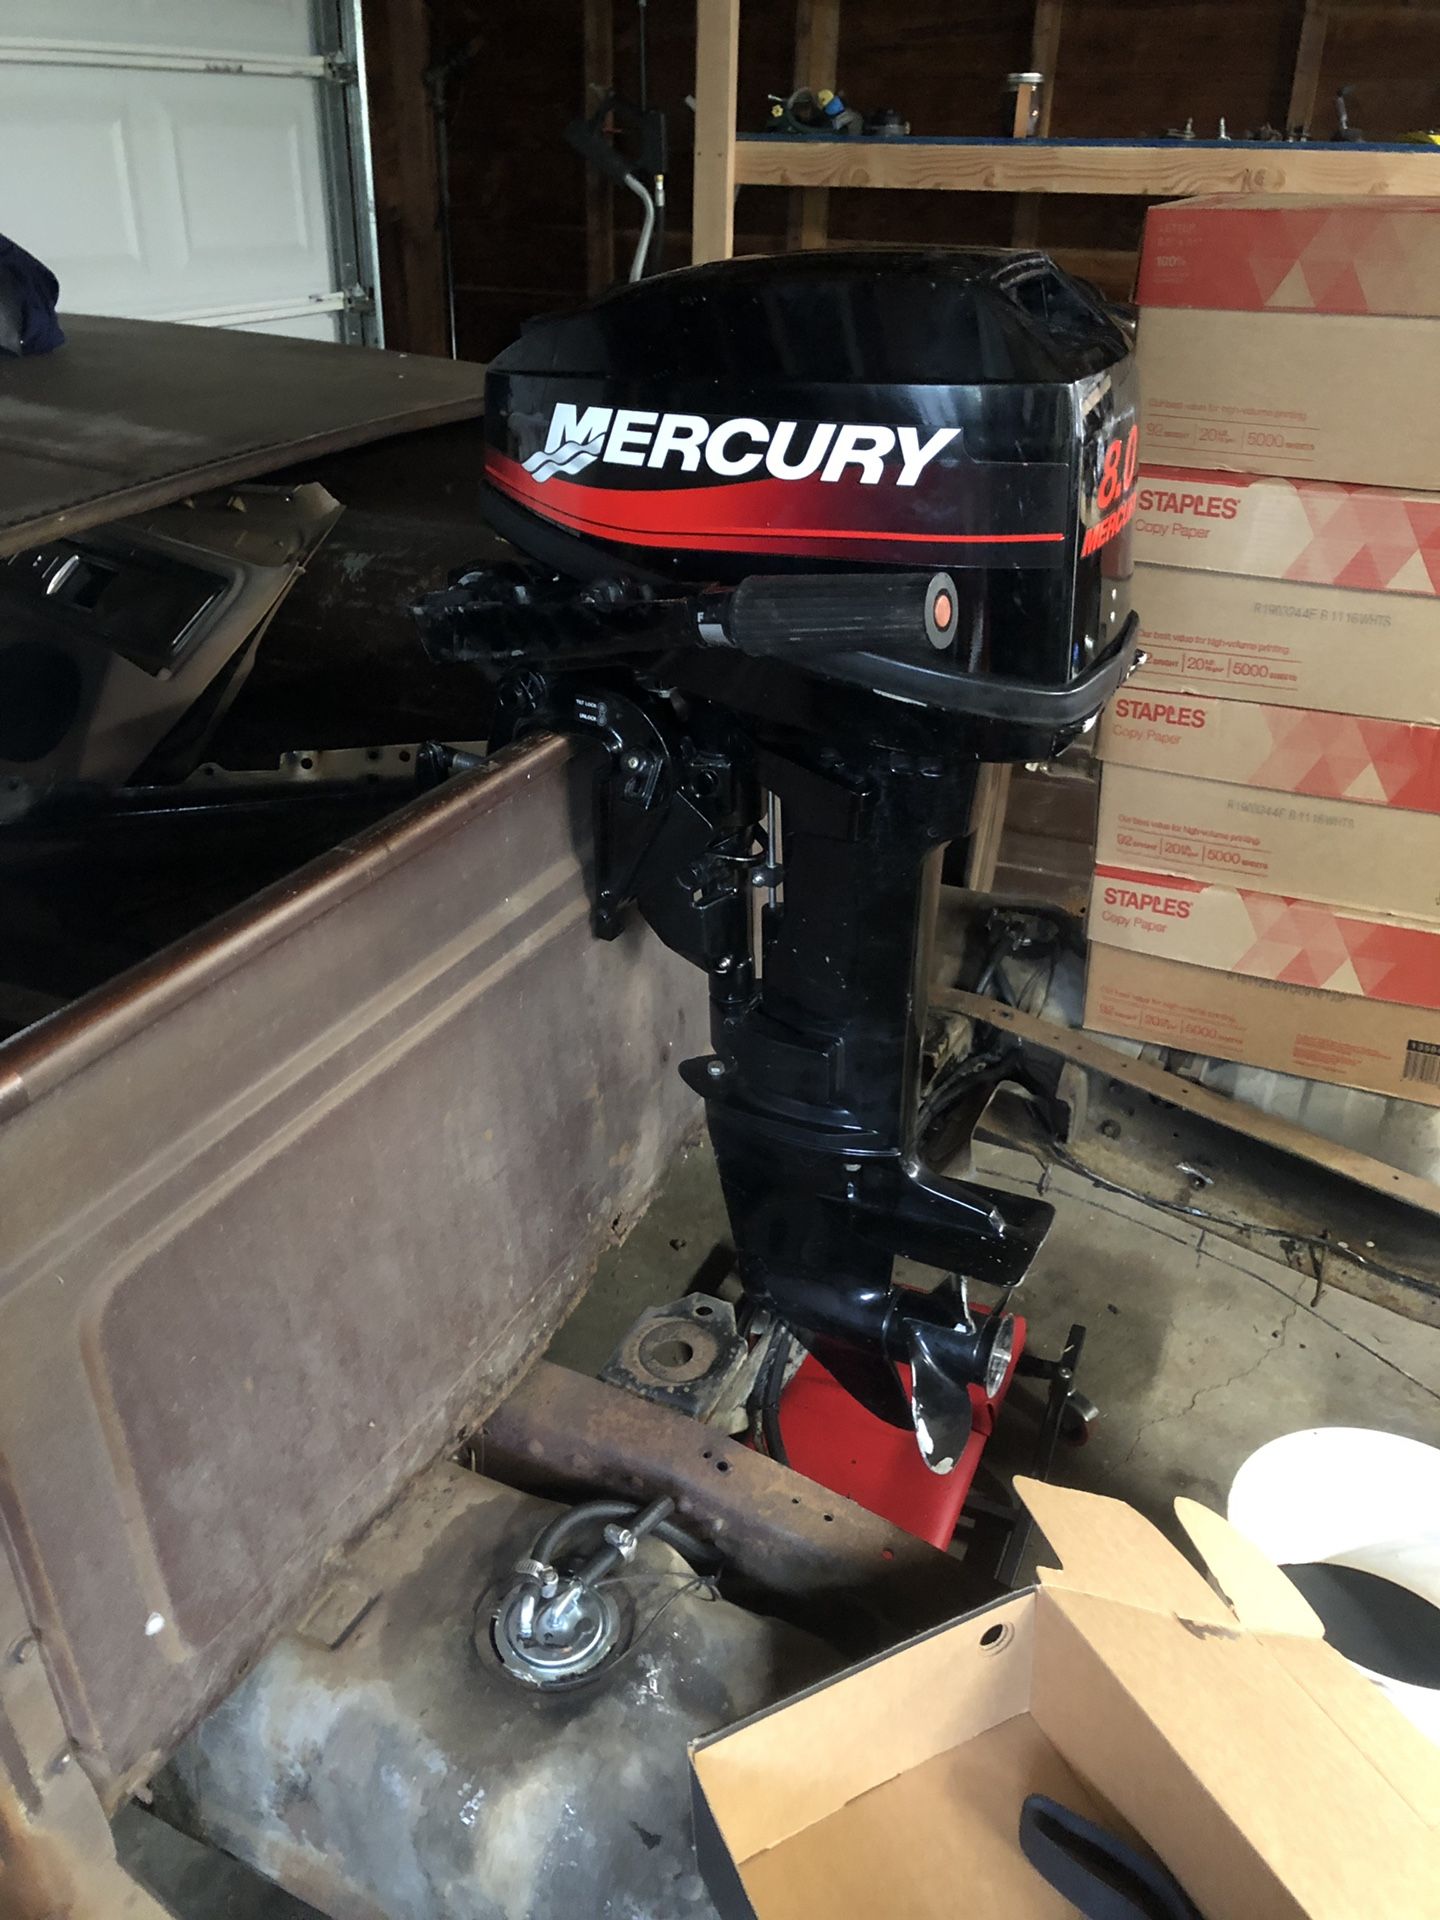 Mercury 8 low hours runs great. New water pump and tune up. Come with west marine fuel tanks also